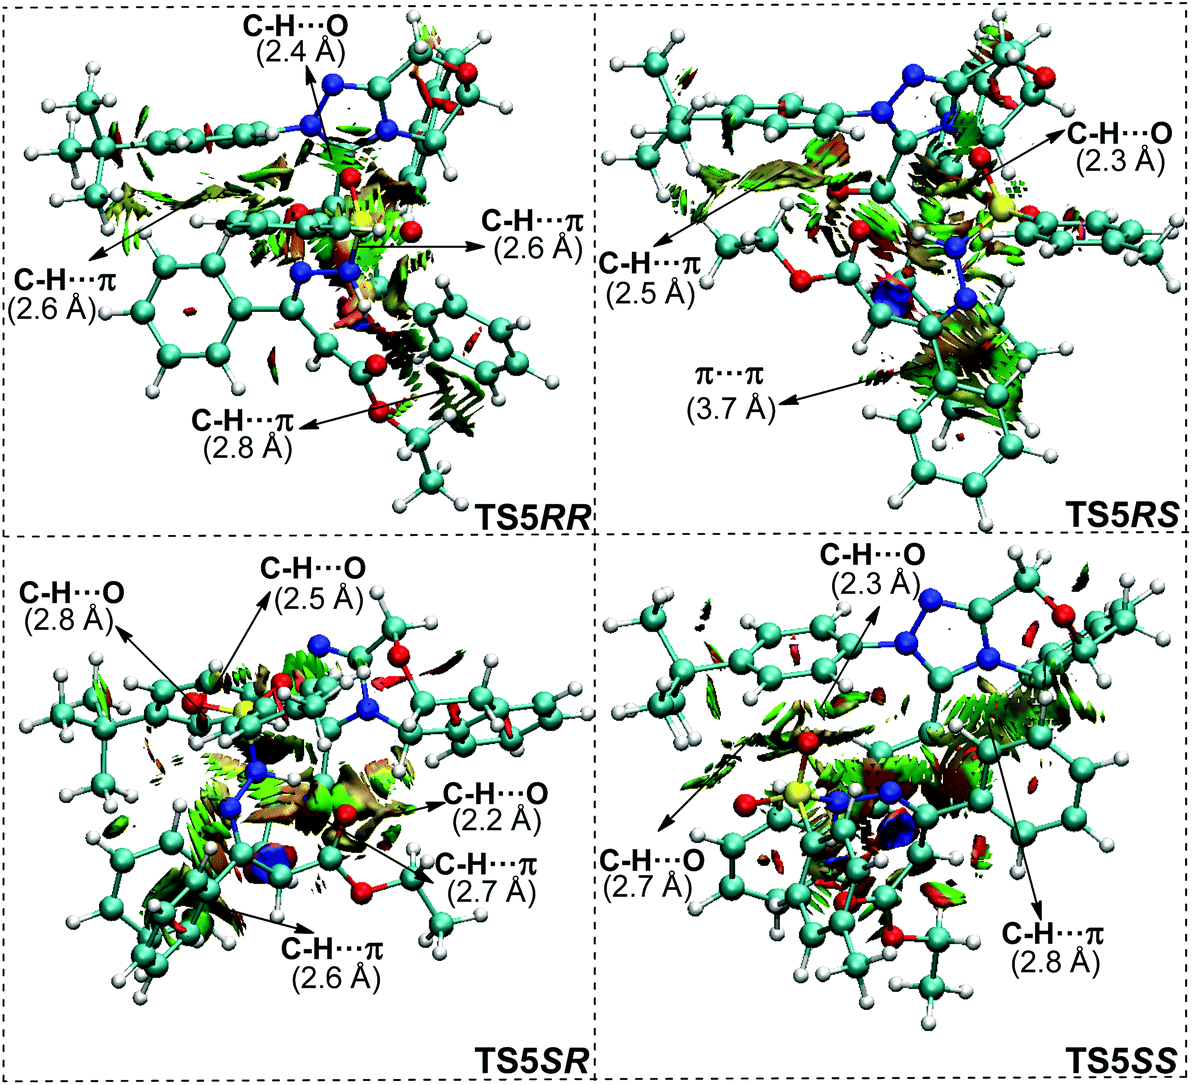 Insights Into N Heterocyclic Carbene Catalyzed 3 4 Annulation Reactions Of 2 Bromoenals With N Ts Hydrazones Organic Chemistry Frontiers Rsc Publishing